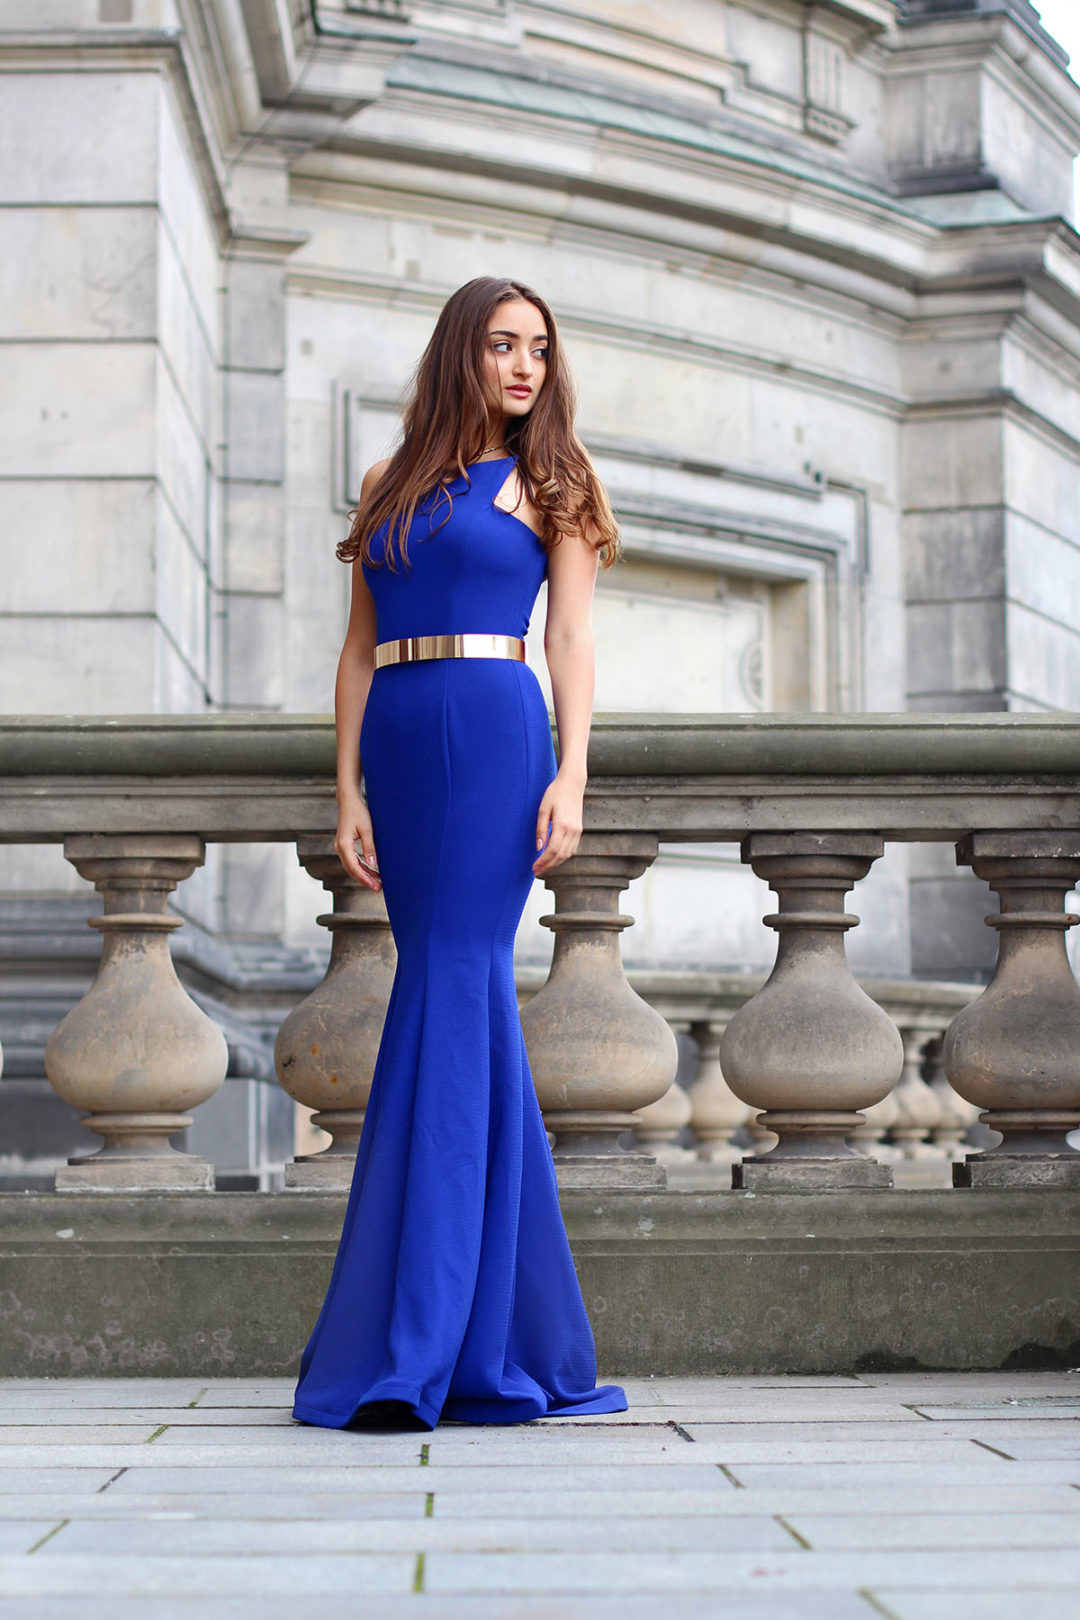 cold bite Engaged A dream in Royal Blue – Wearing a Nicole Bakti Dress - Personal Blog by  Ranim Helwani